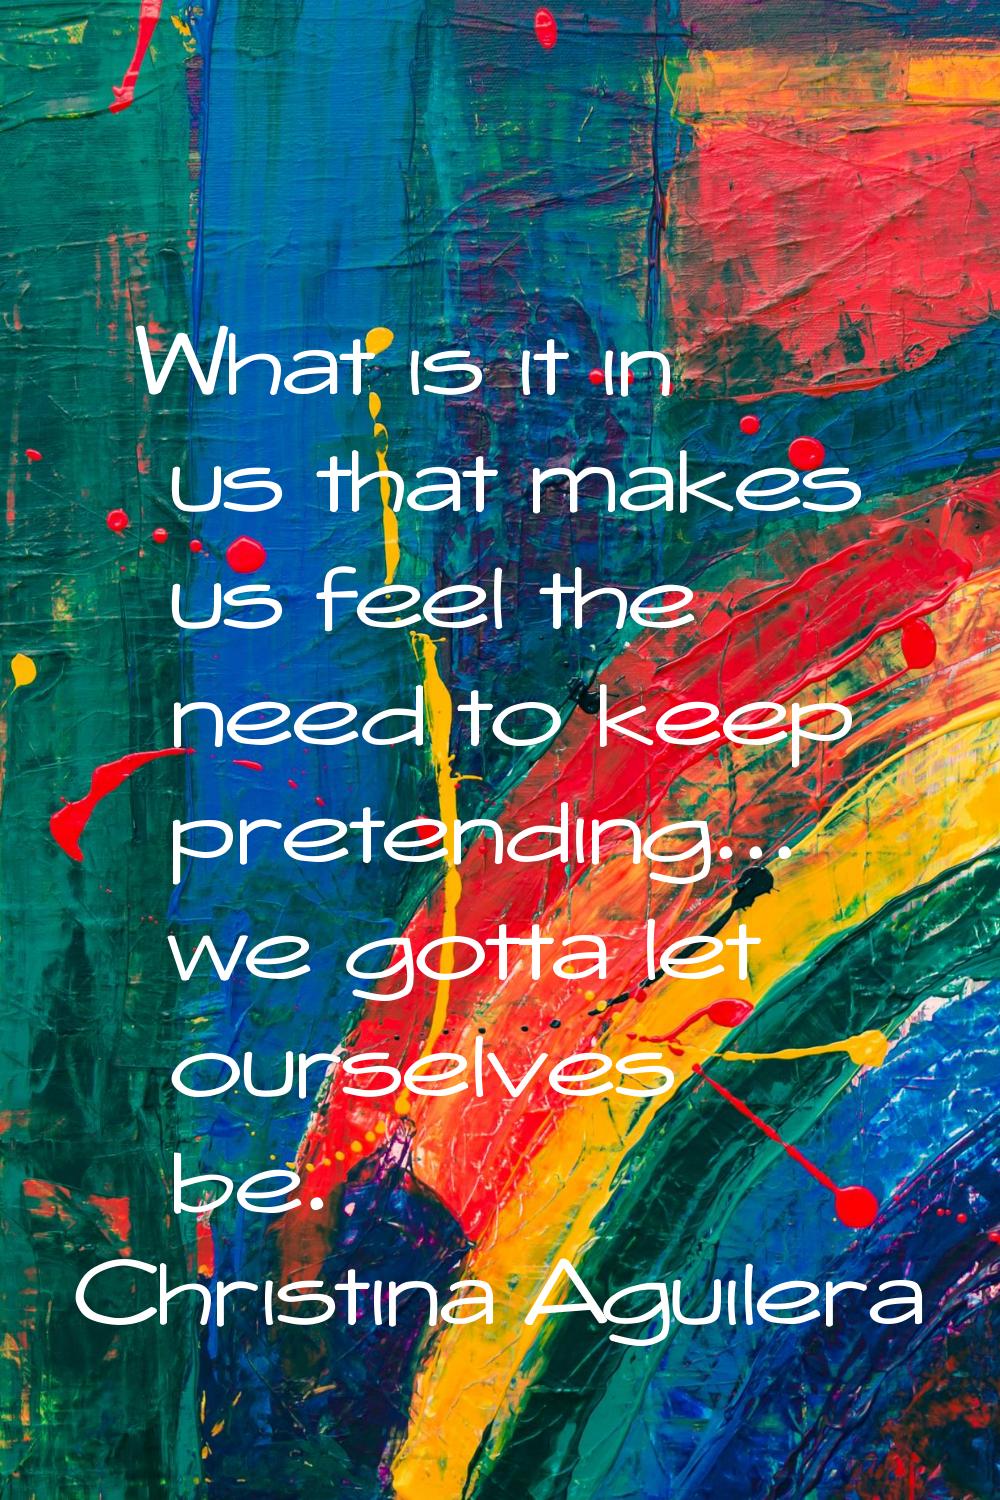 What is it in us that makes us feel the need to keep pretending... we gotta let ourselves be.